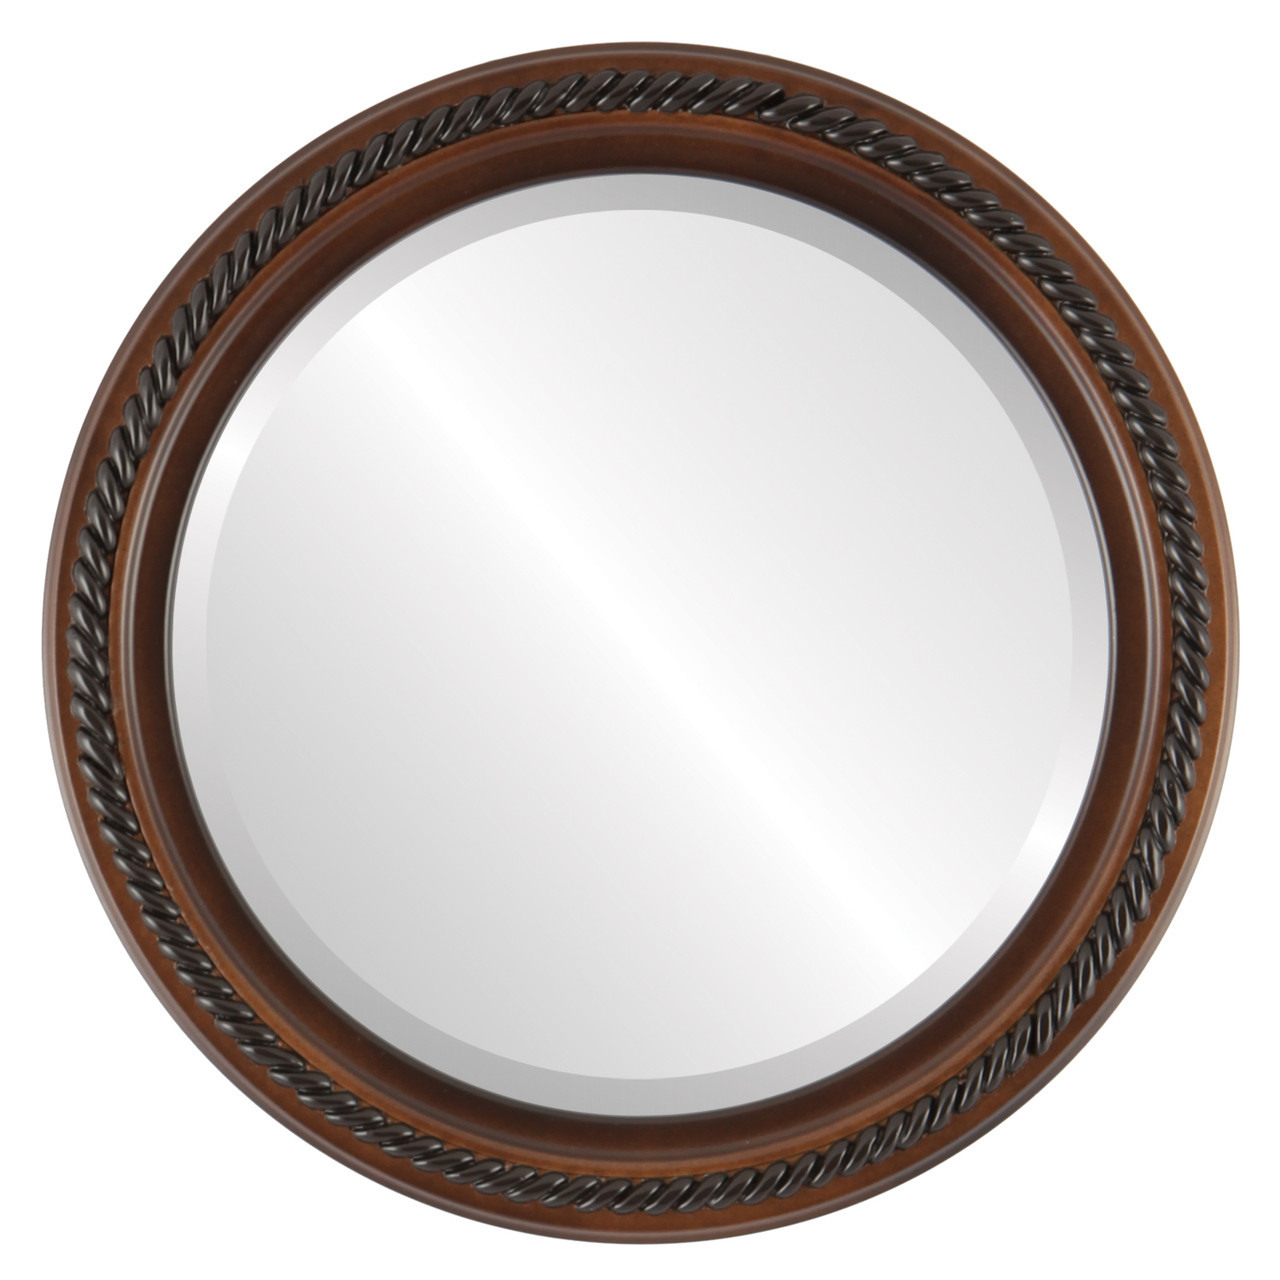 Antique Brown Round Mirrors from $136 Free Shipping